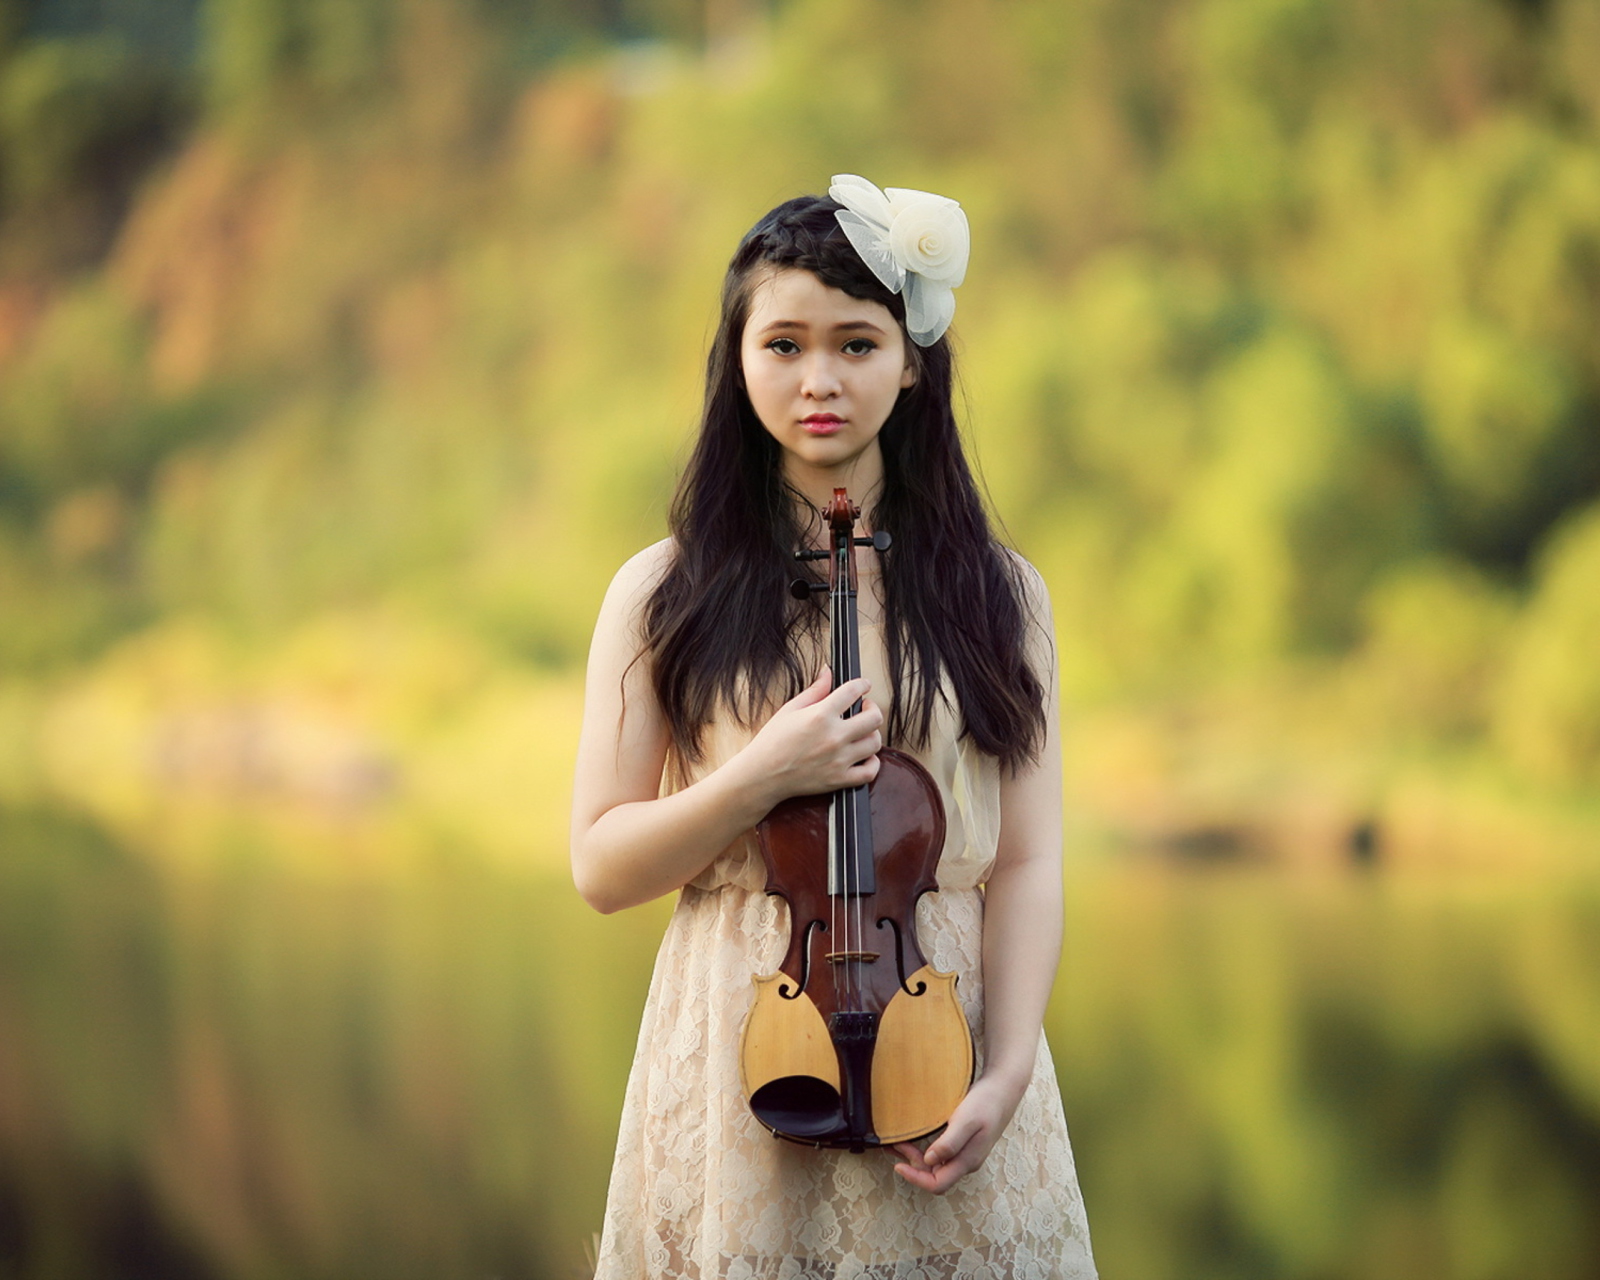 Girl With Violin wallpaper 1600x1280